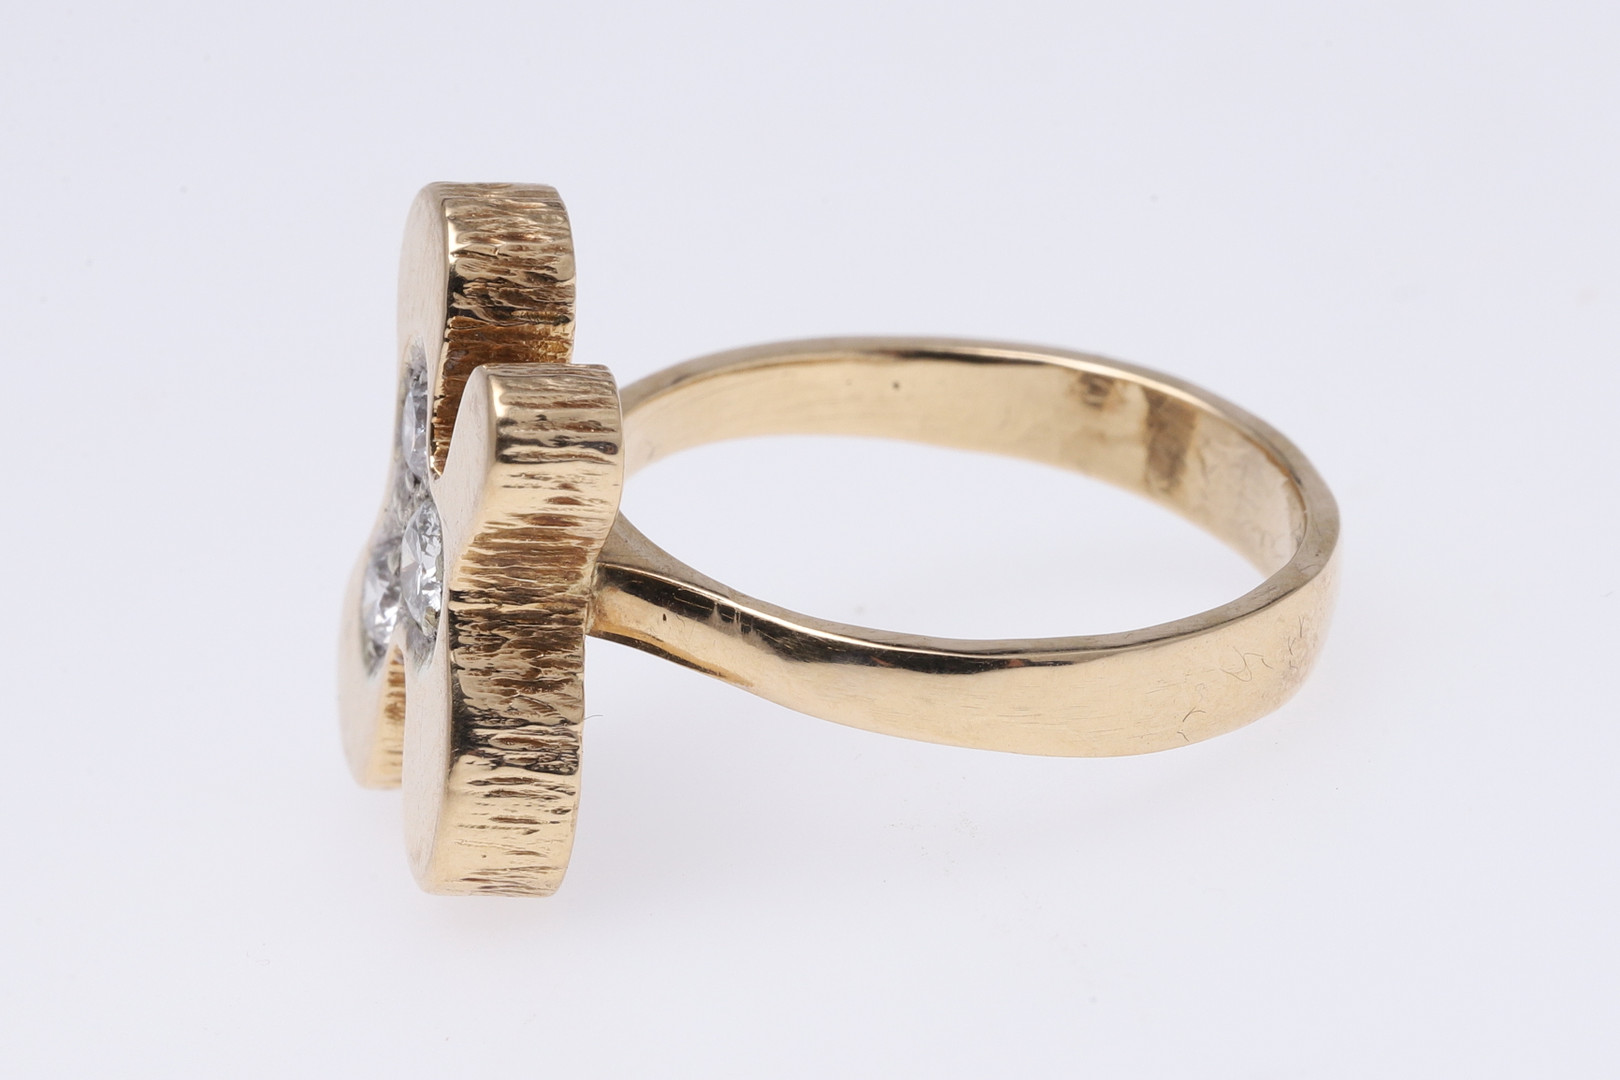 A DIAMOND AND GOLD RING BY OLE LYNGGAARD, COPENHAGEN. - Image 2 of 7